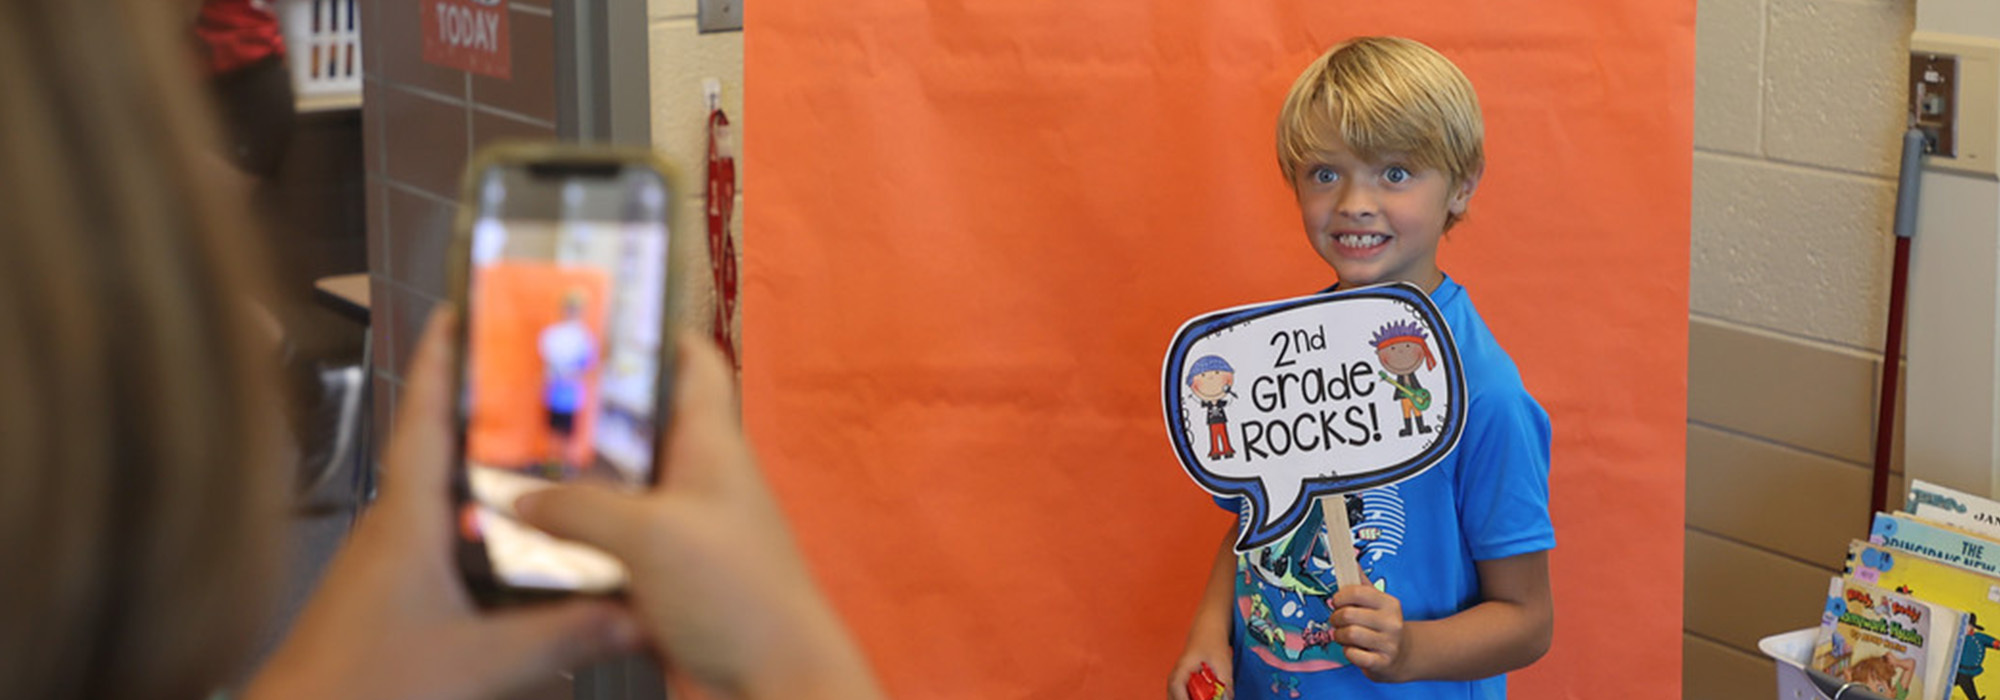 boy poses for pic with 2nd grade rocks sign